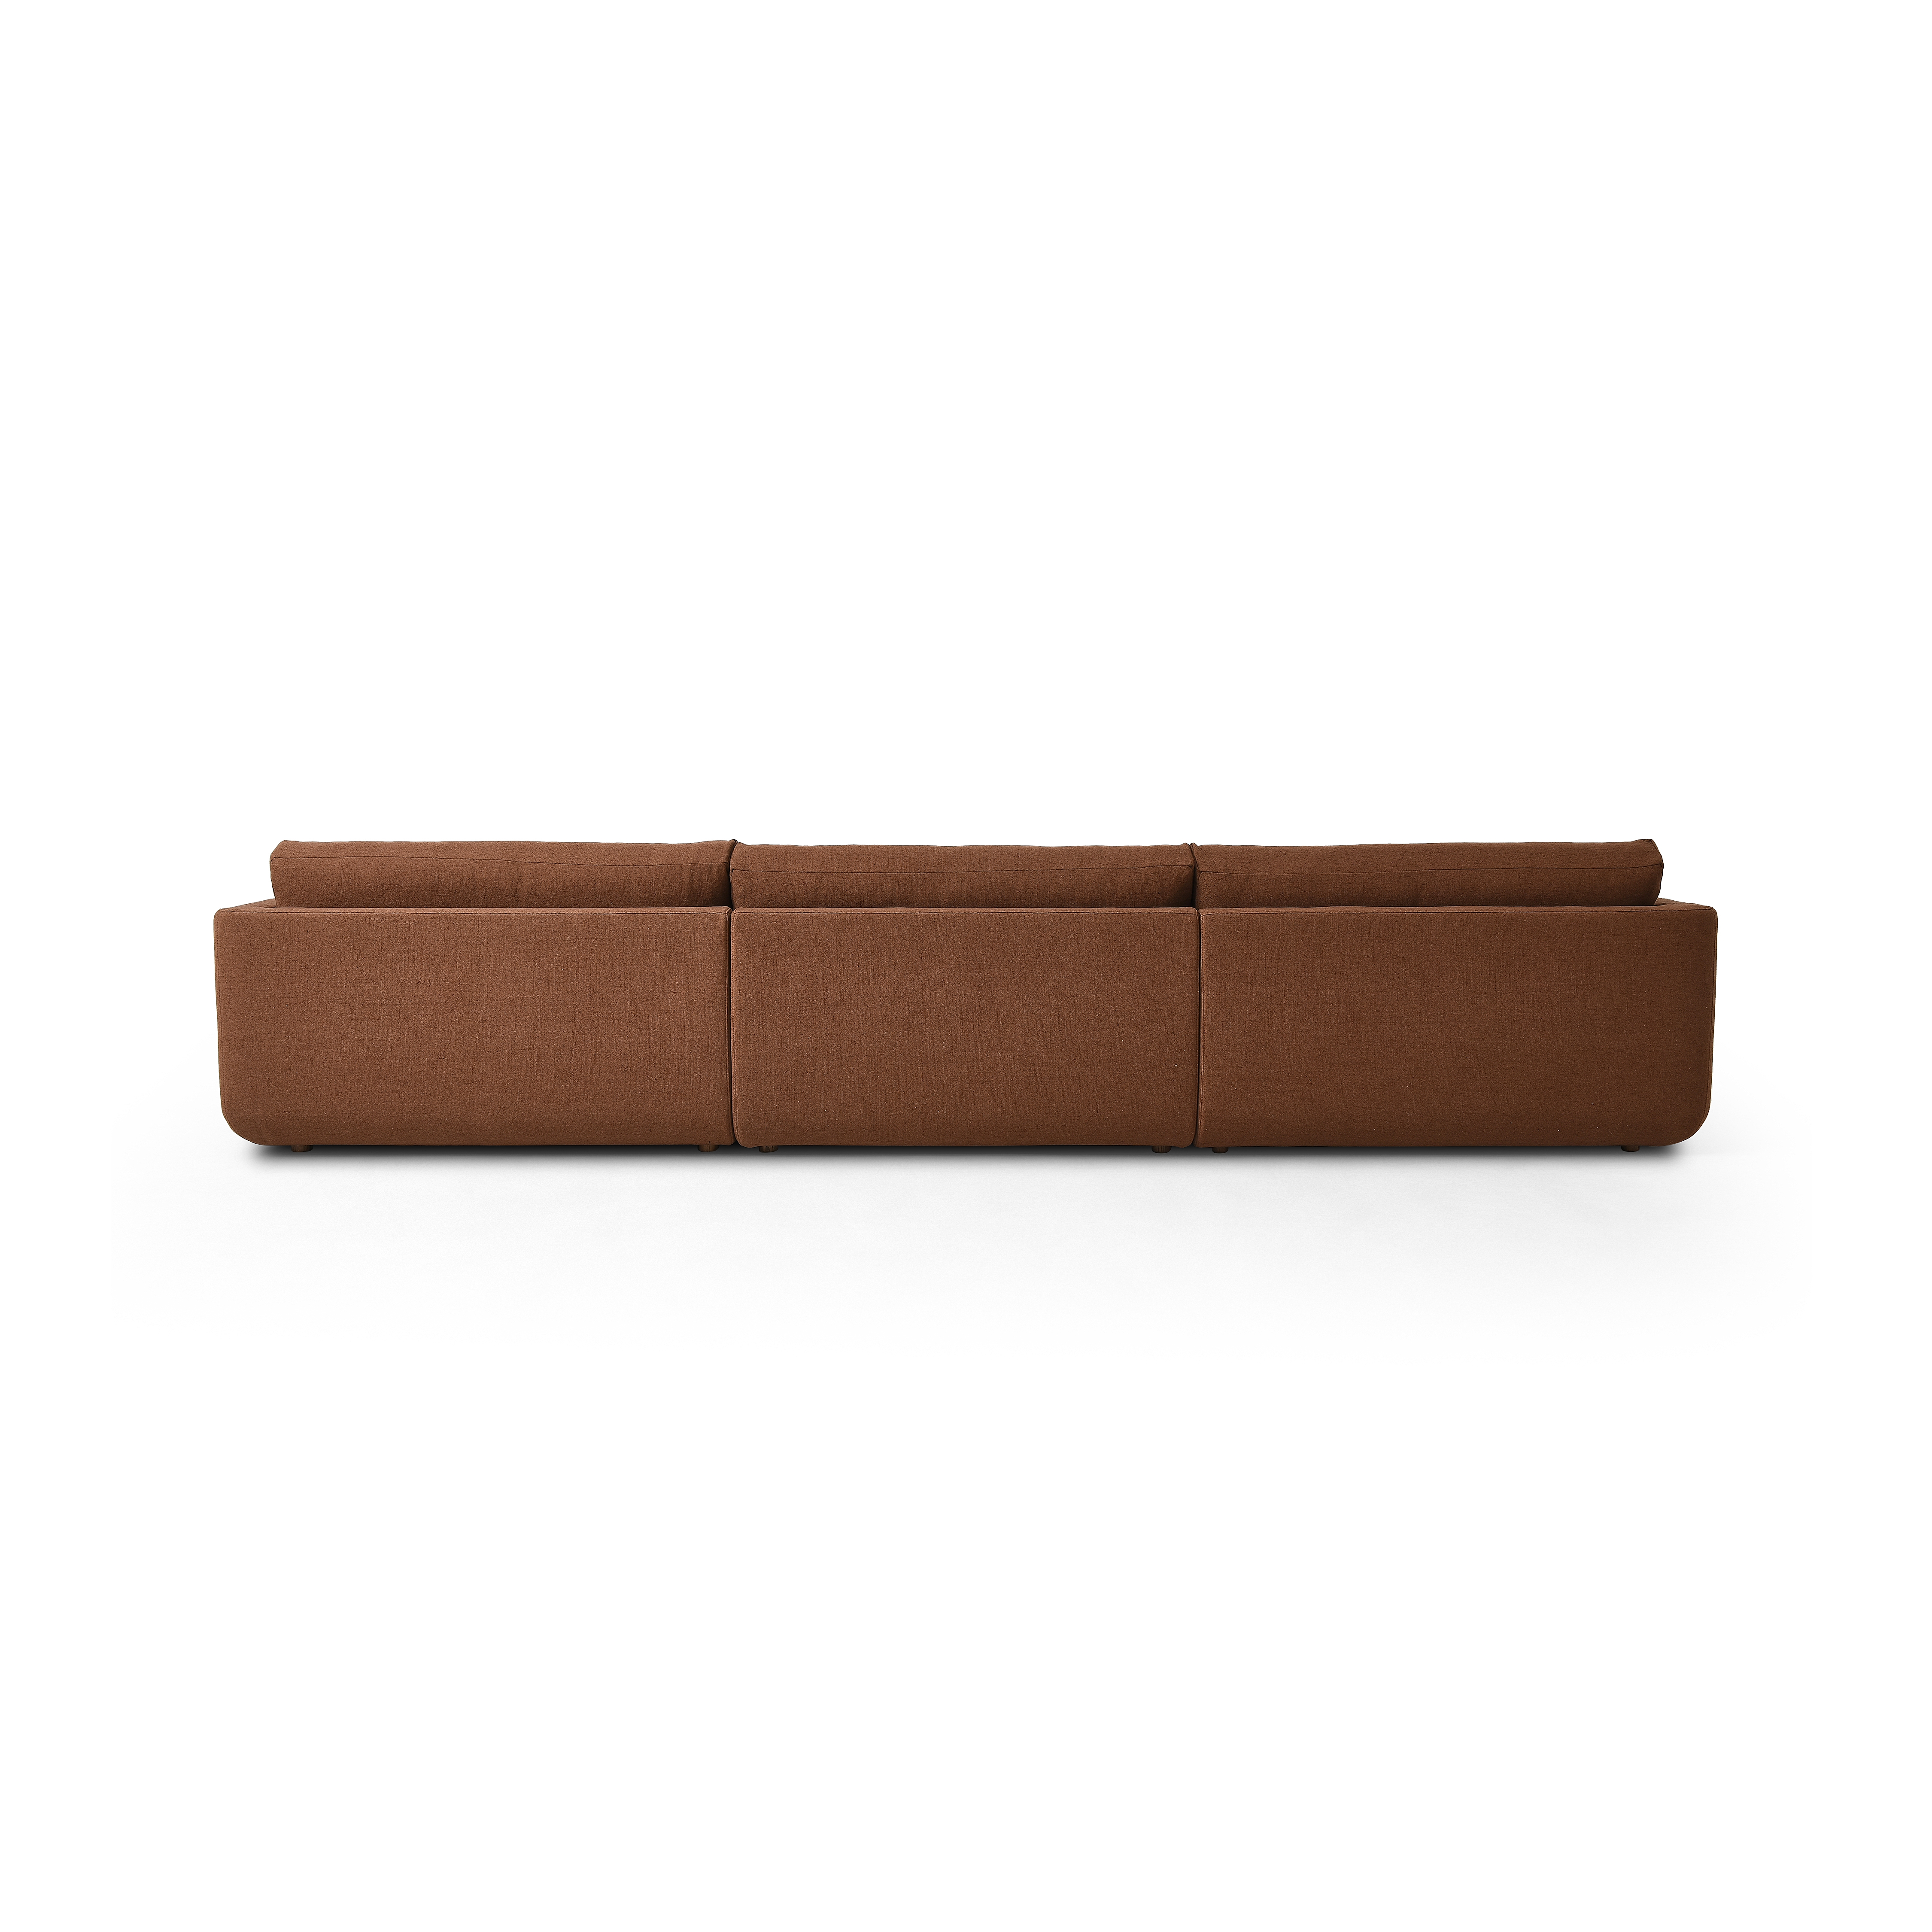 Toland 3pc Sectional-153"-Bartin Rust - Image 4